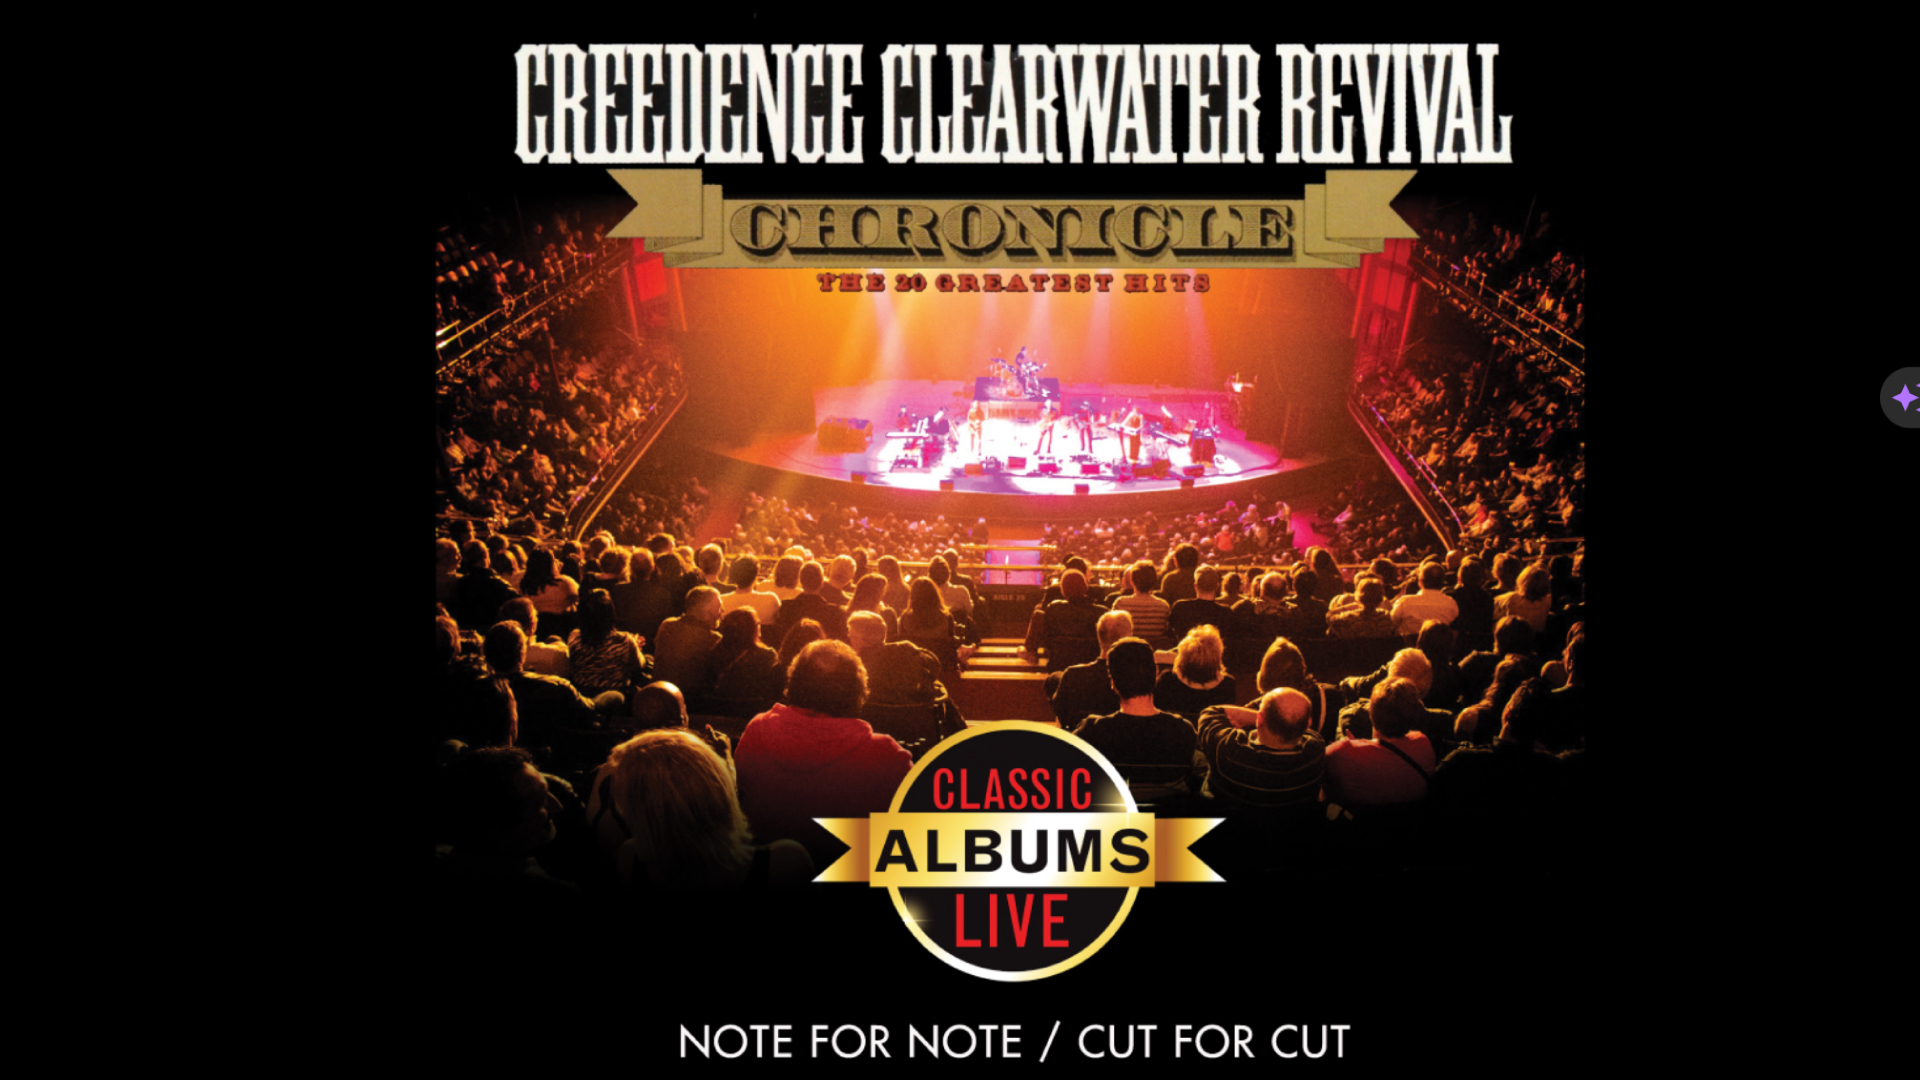 Credence Clear Water Revival